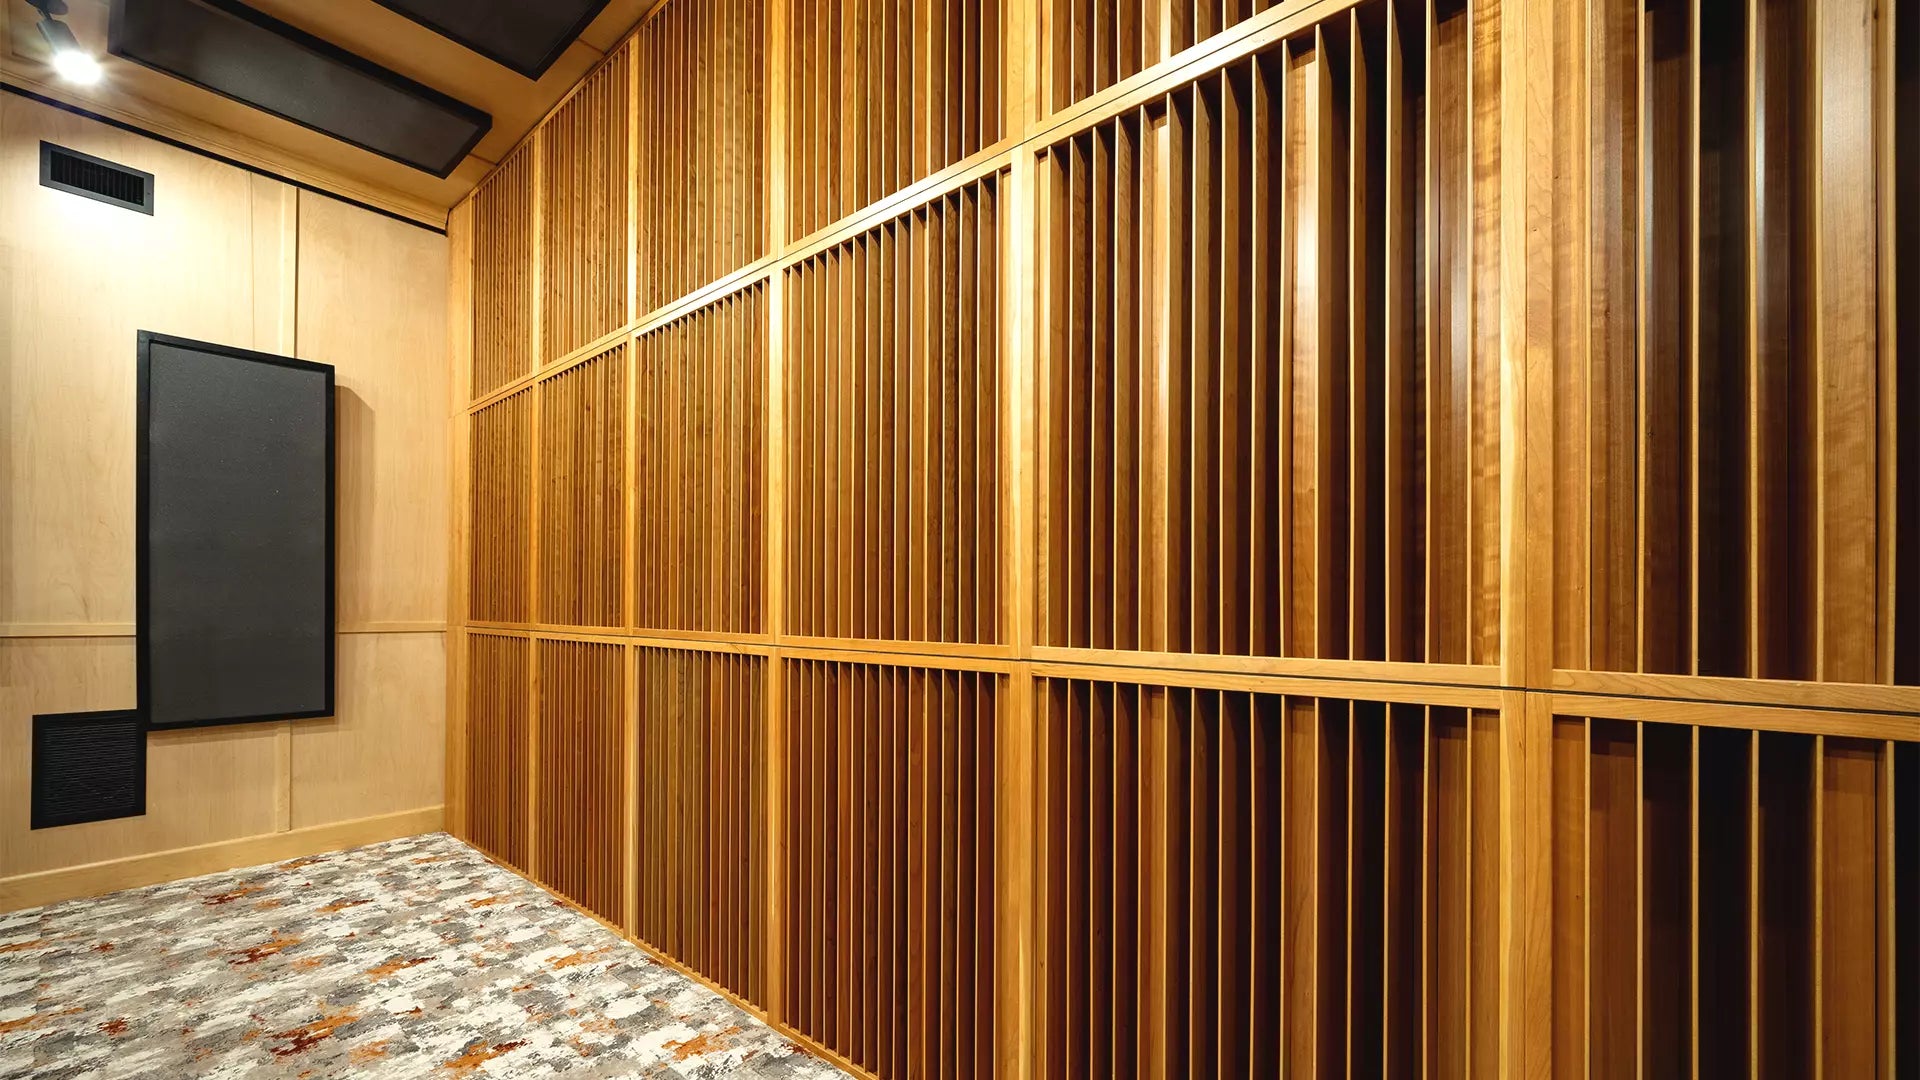 Sound Diffusers vs. Acoustic Panels - What's the Difference?